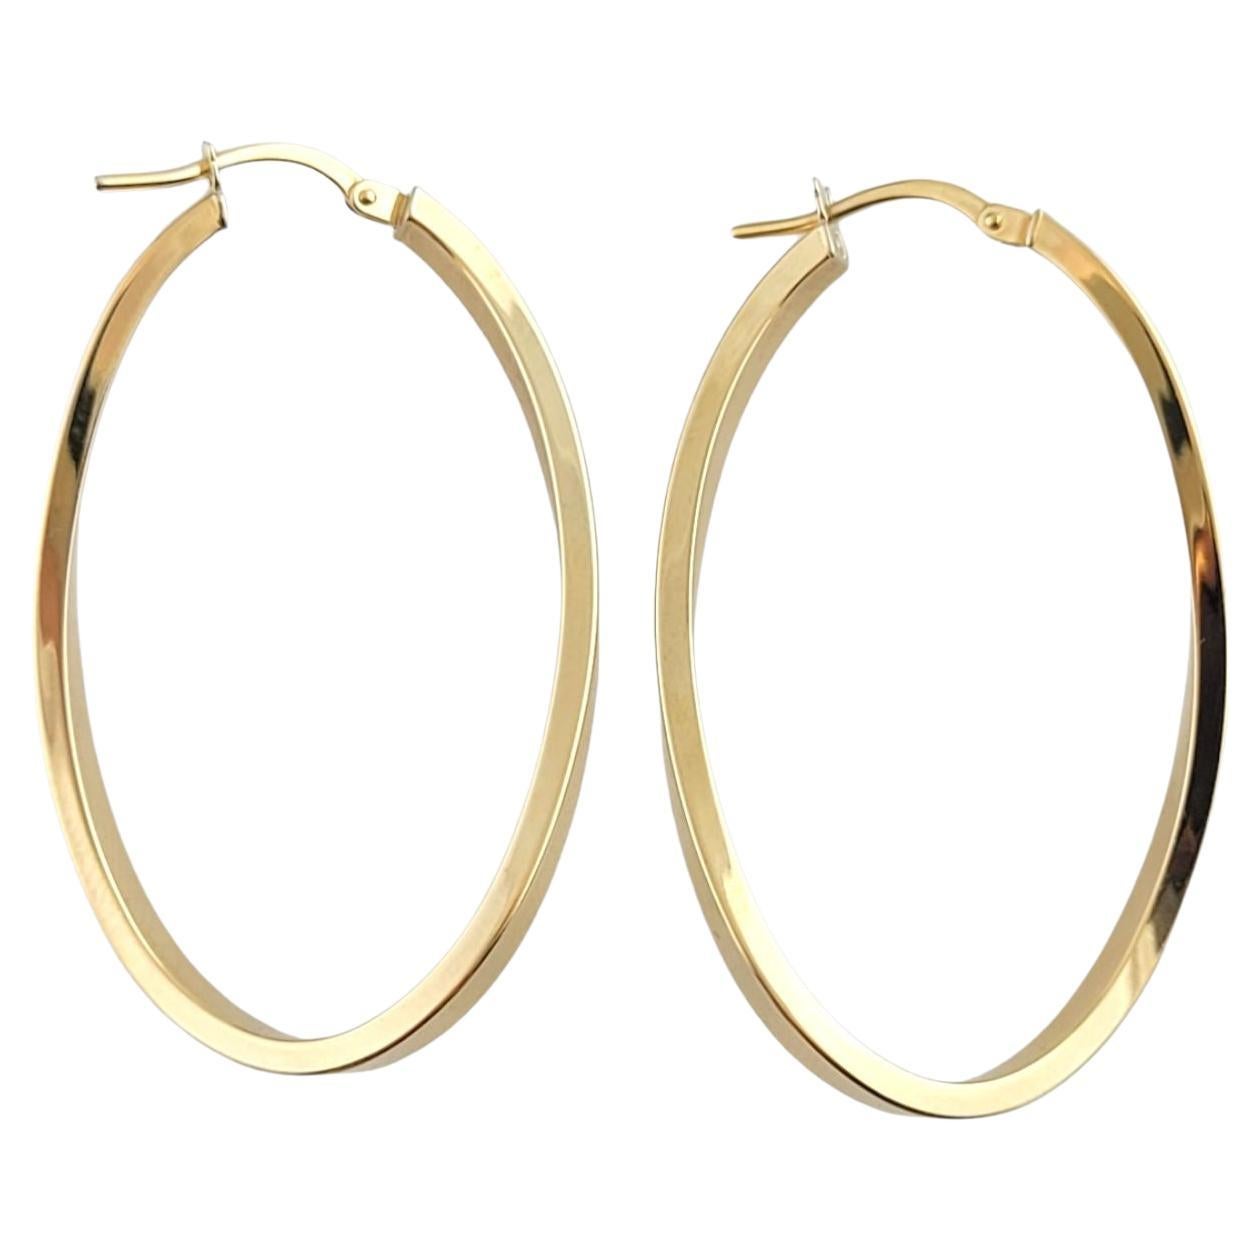  18K Yellow Gold Curved Oval Hoop Earrings #14795